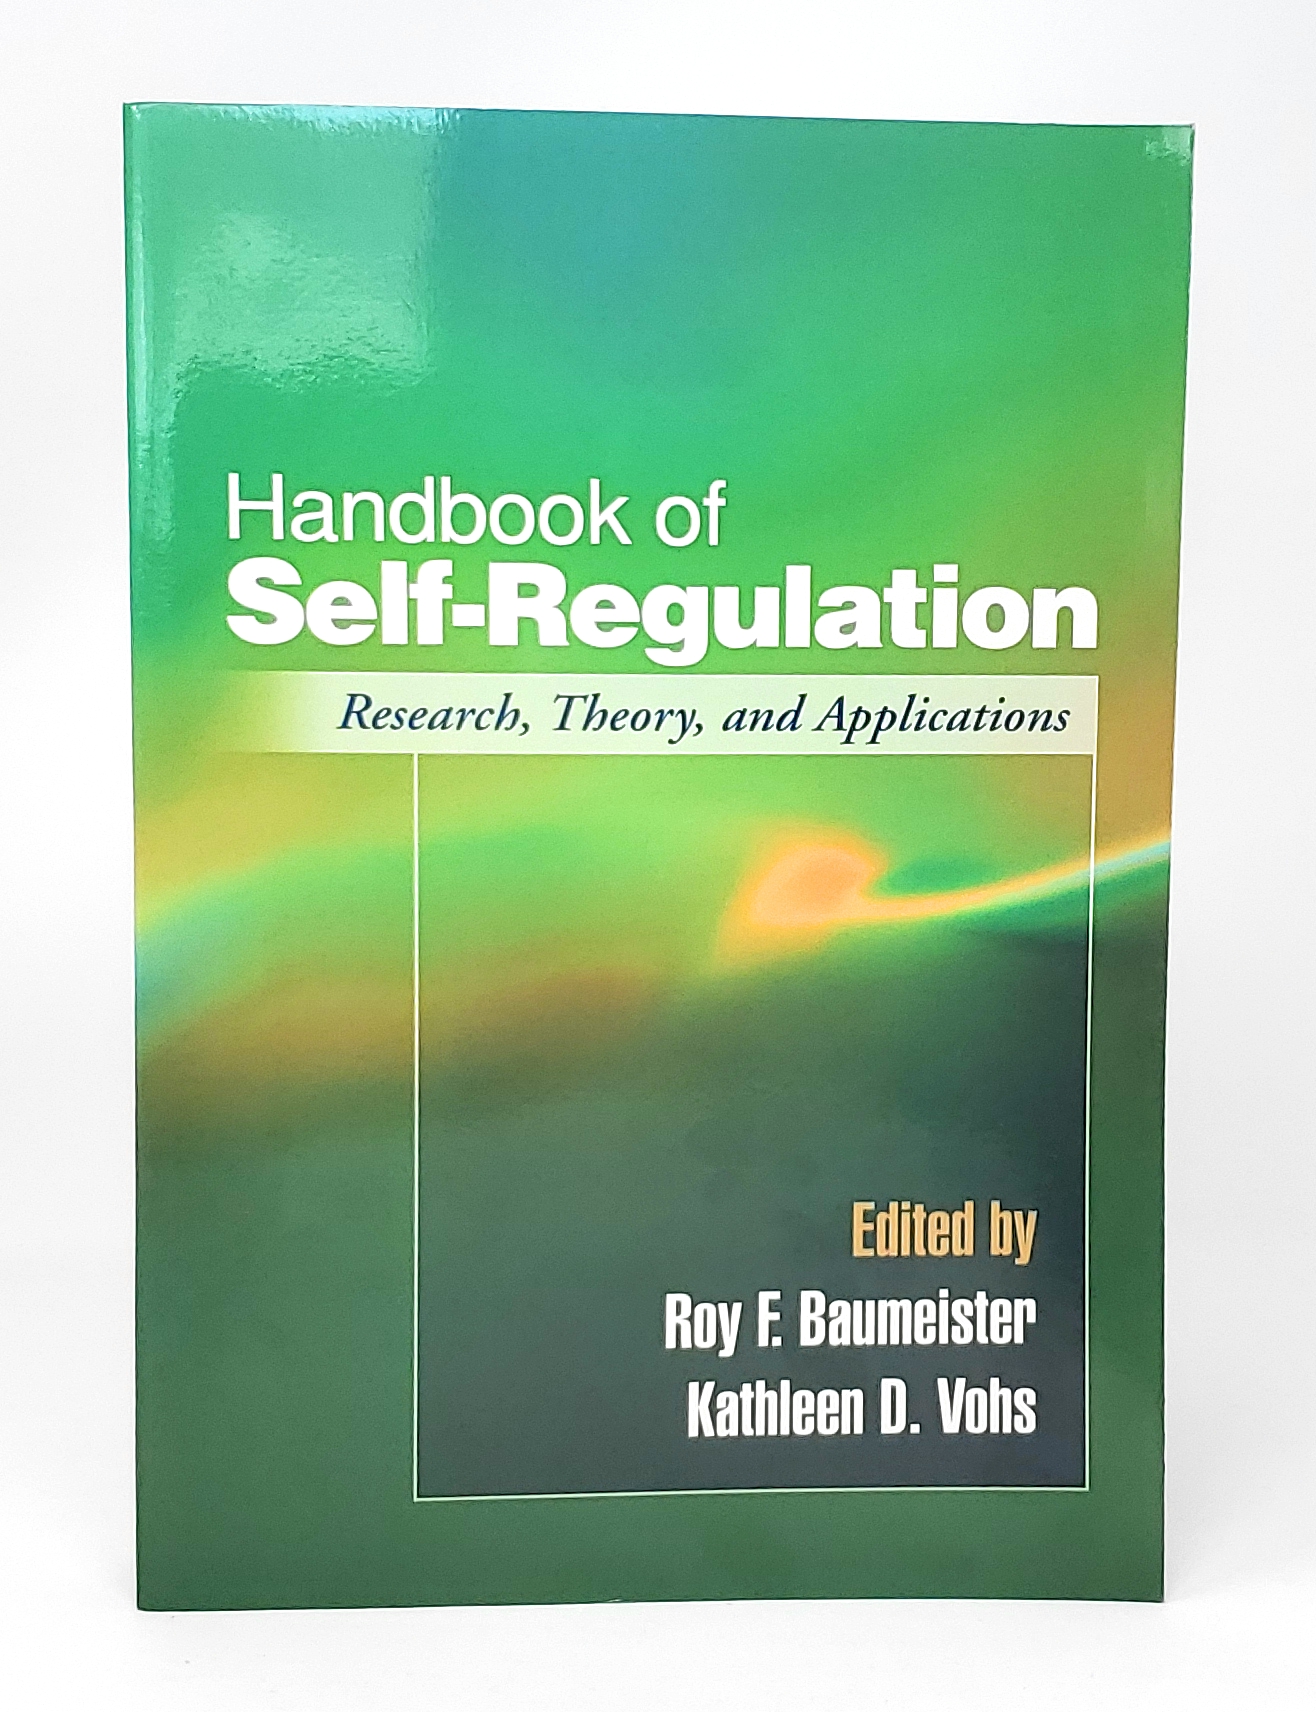 Handbook of Self-Regulation: Research, Theory, and Applications - Baumeister, Roy F. (Ed.); Vohs, Kathleen D. (Ed.)